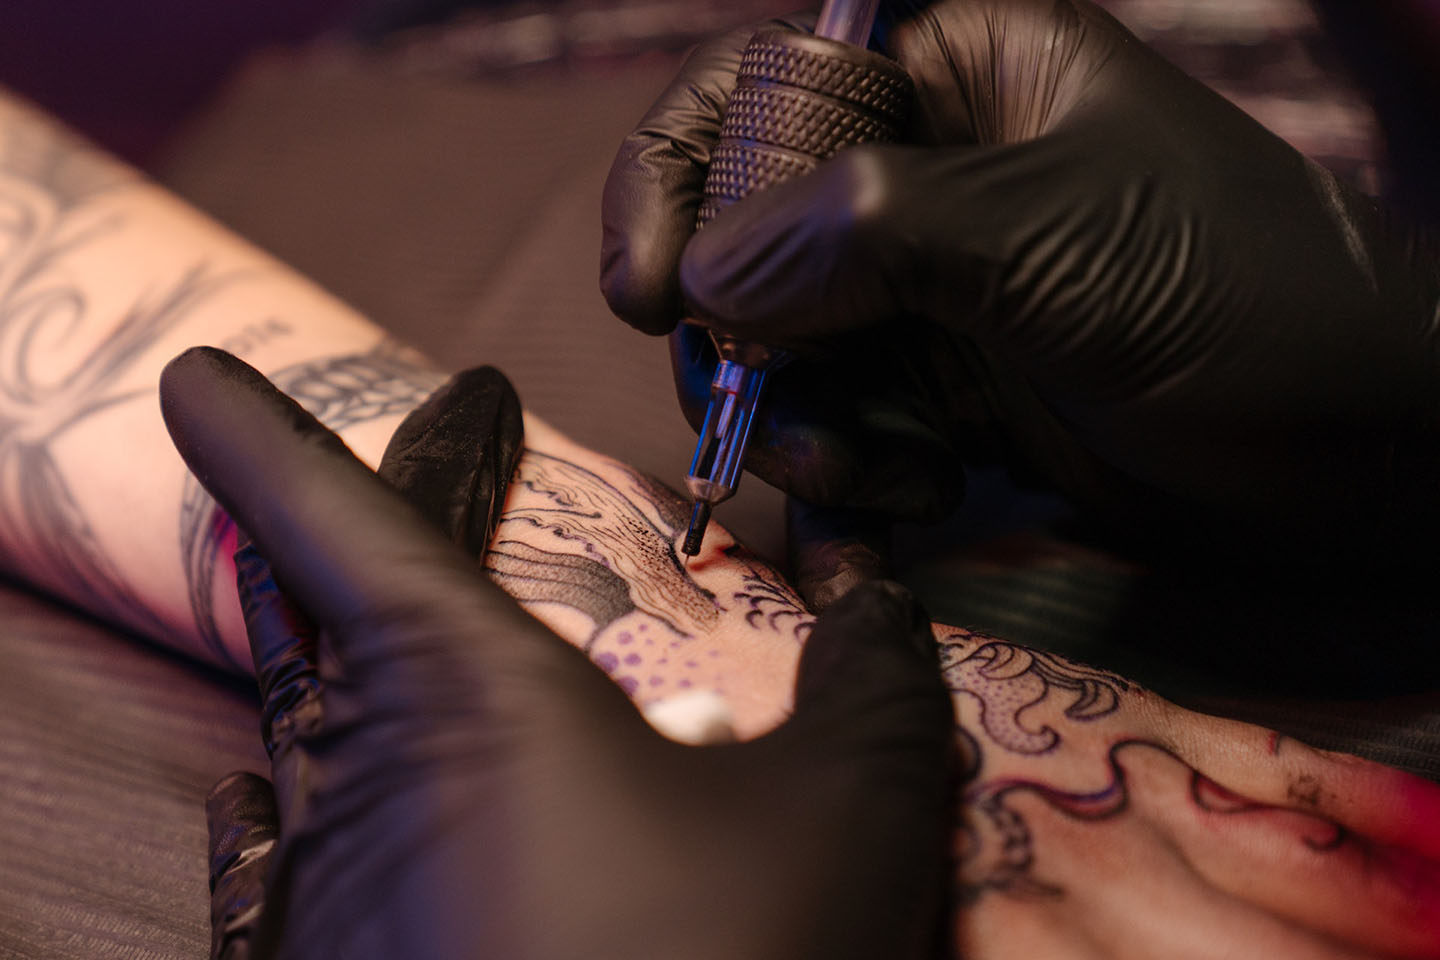 artist wearing black gloves while doing tatoo on a person's arm